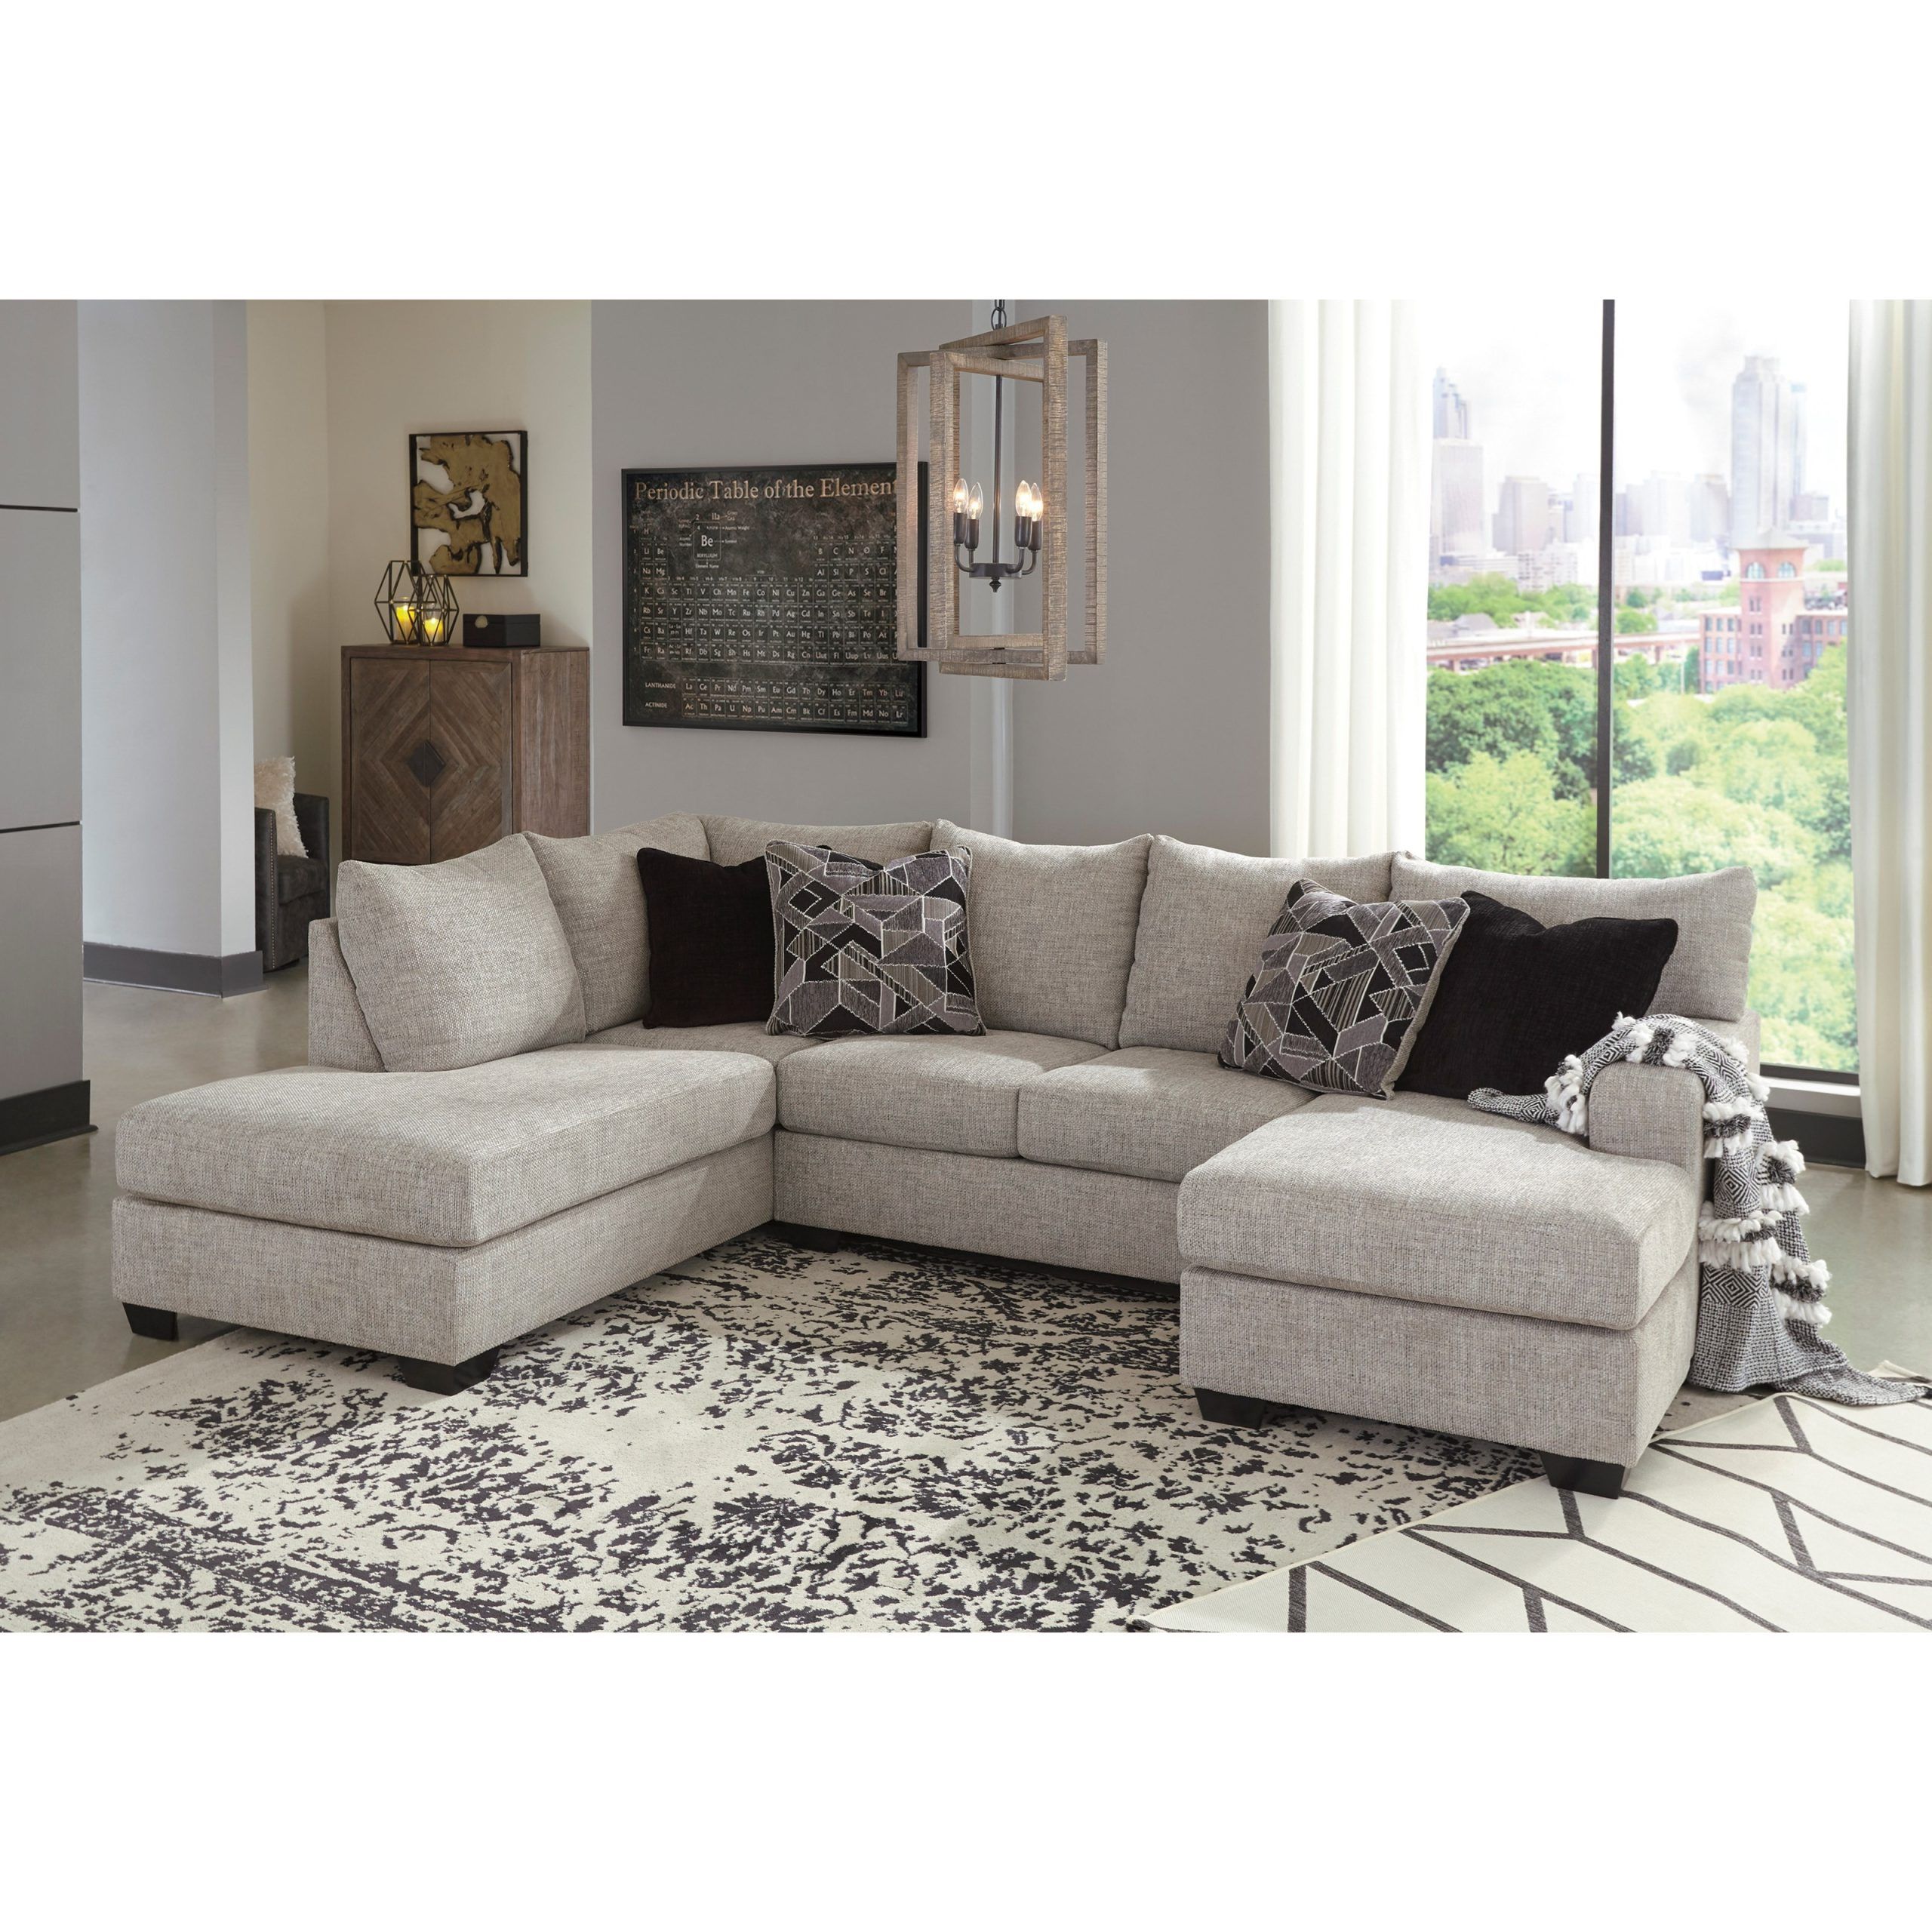 U Shaped Sectional With Two Chaises | Sadler's Home Furnishings For Modern U Shaped Sectional Couch Sets (View 15 of 20)